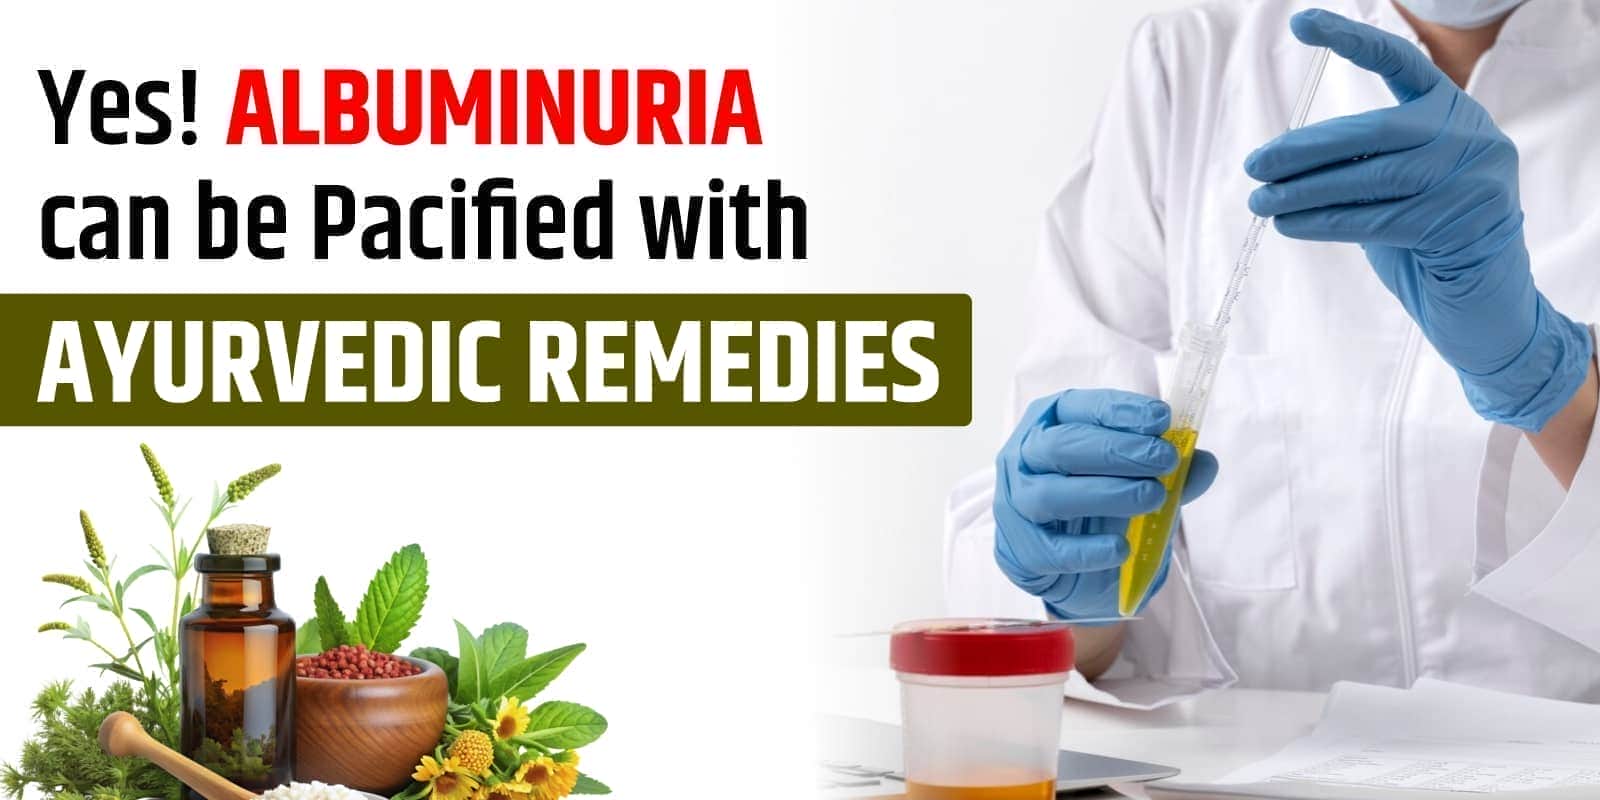 Yes! Albuminuria can be Pacified with Ayurvedic Remedies